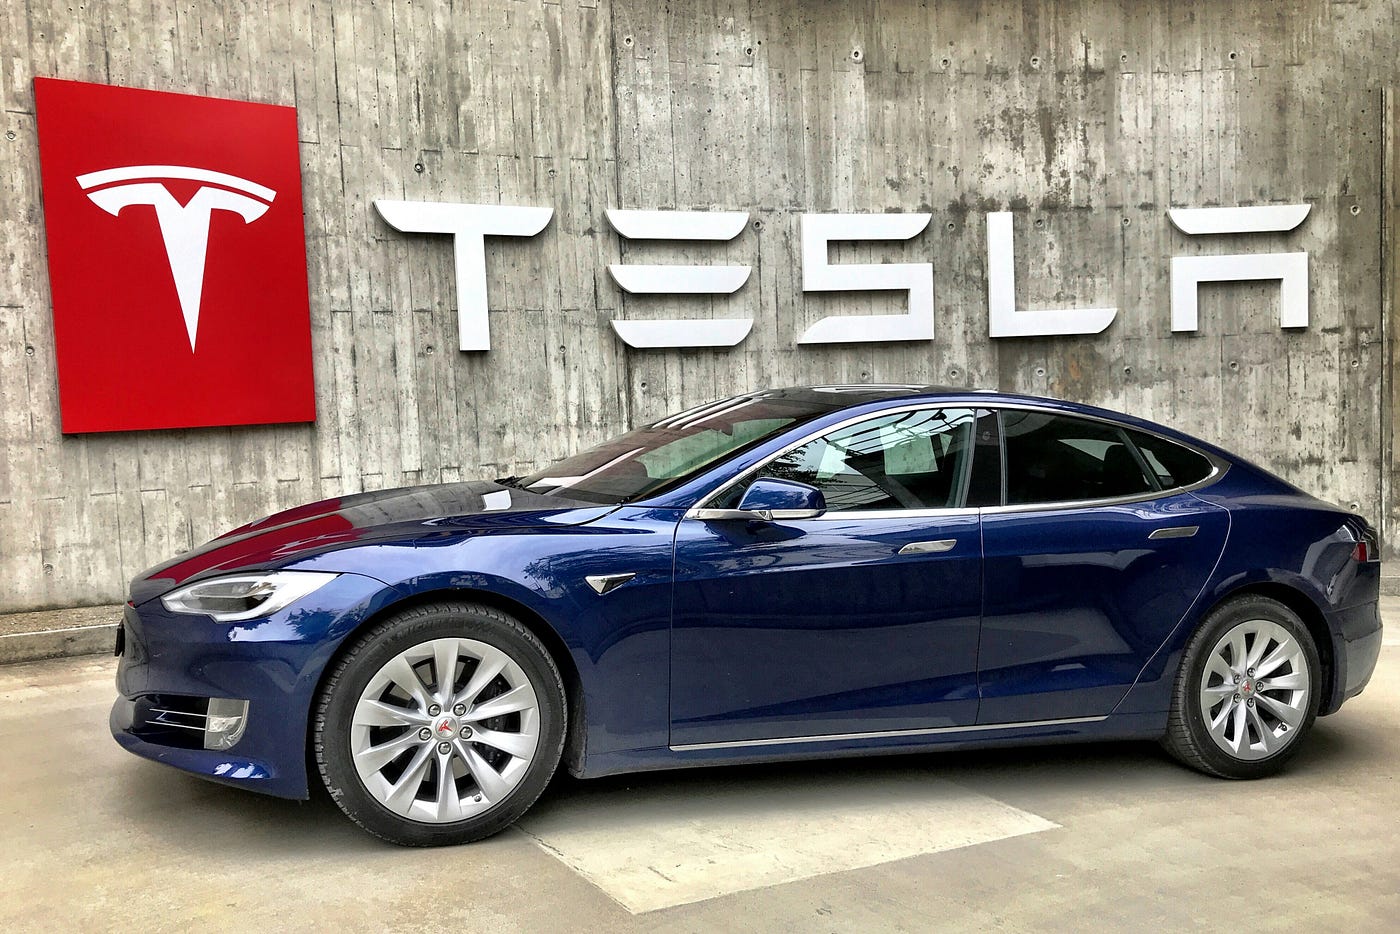 Tesla's Cool Move: Giving Hackers Cars and Cash for Making EVs Safer